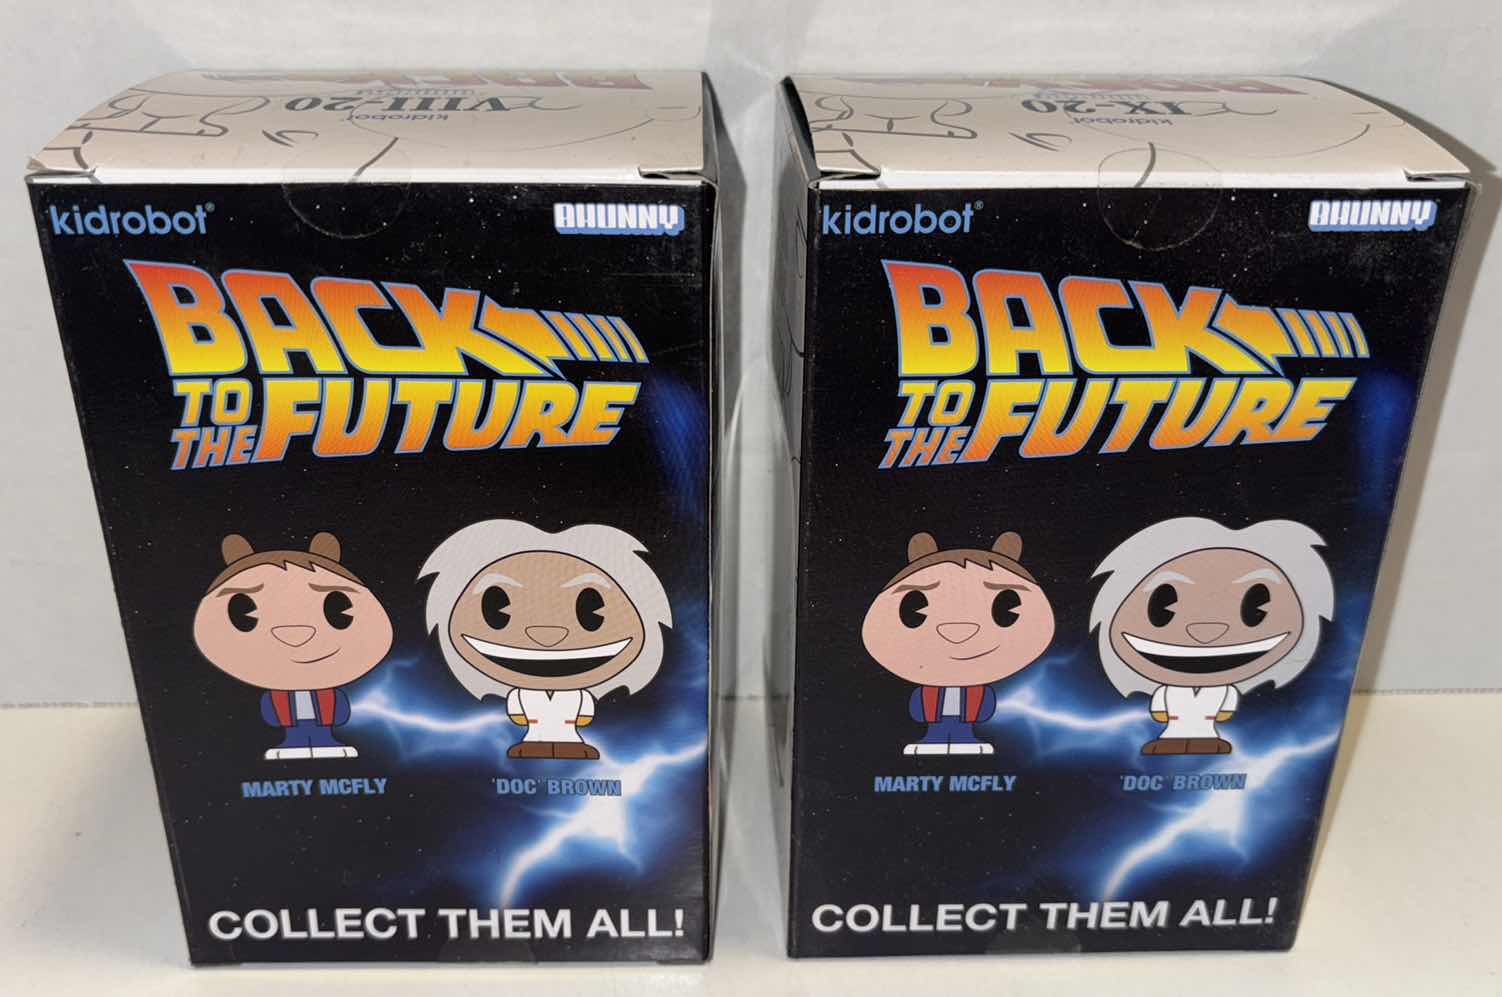 Photo 3 of NEW KIDROBOT BACK TO THE FUTURE 2-PACK BHUNNY 4” VINYL FIGURE, MARTY MCFLY & DOC BROWN W BHUNNY PAW KEYCHAIN